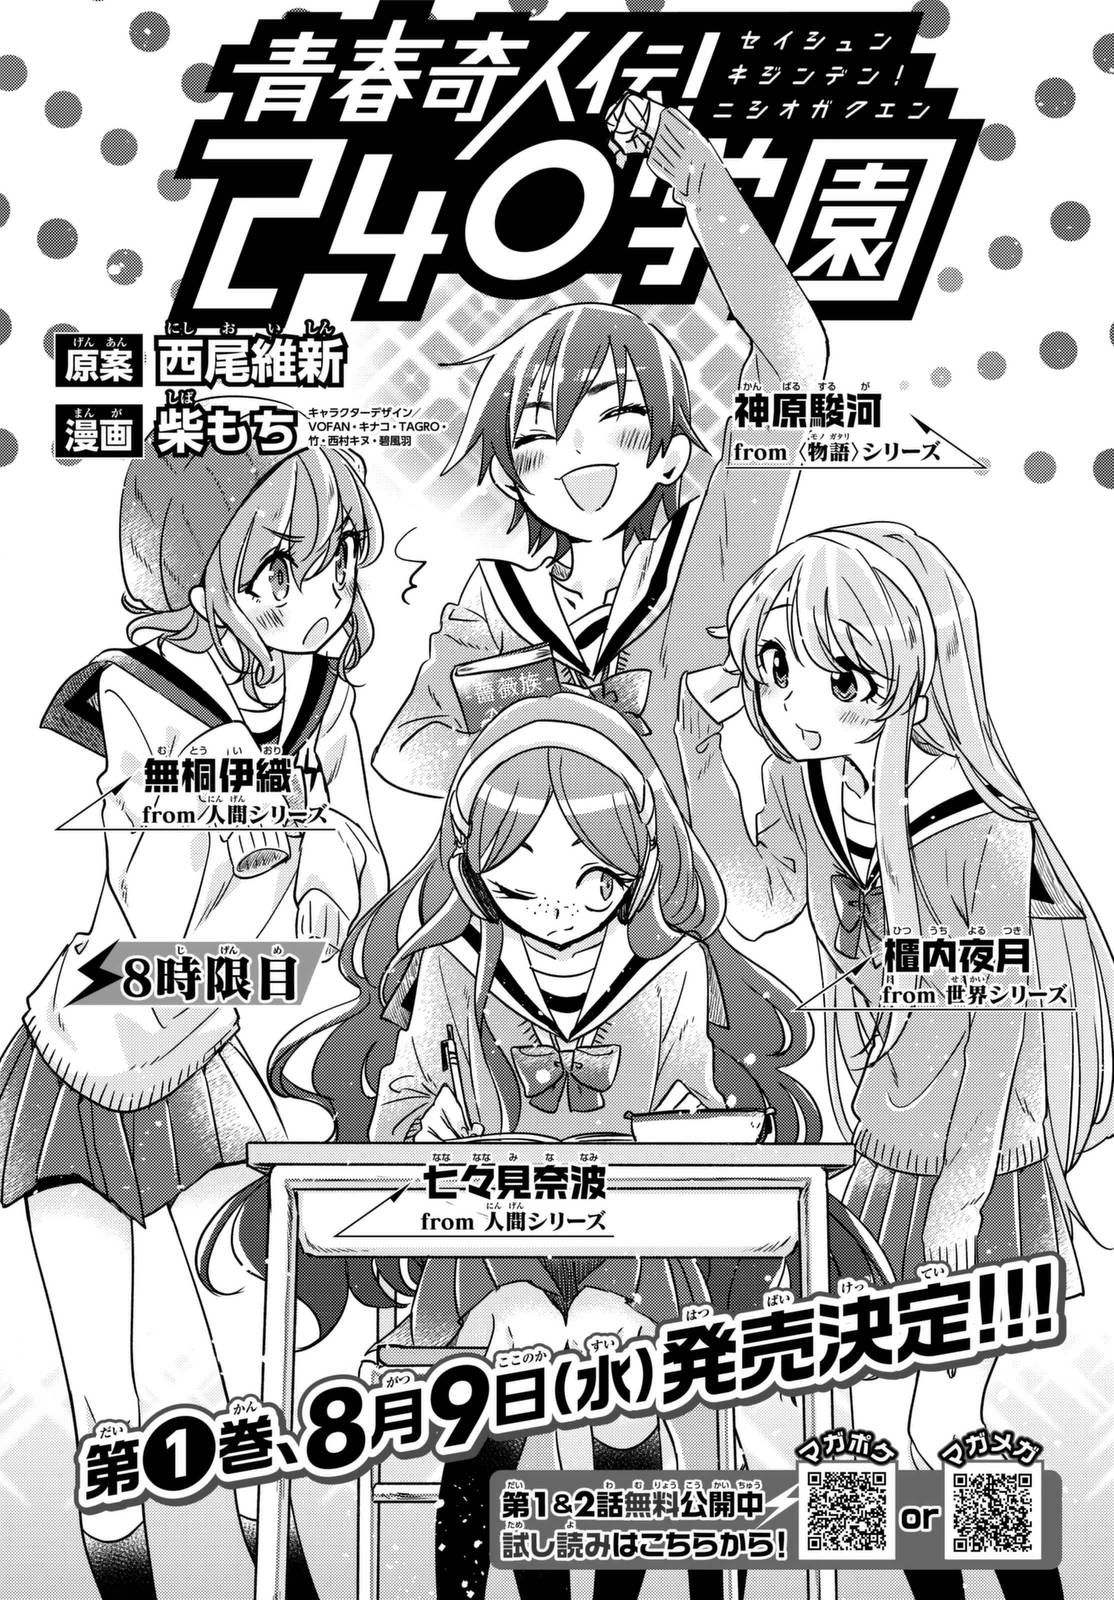 Legend of Eccentric Youth! 240 Academy Chapter 8 | NISIOISIN Wiki 